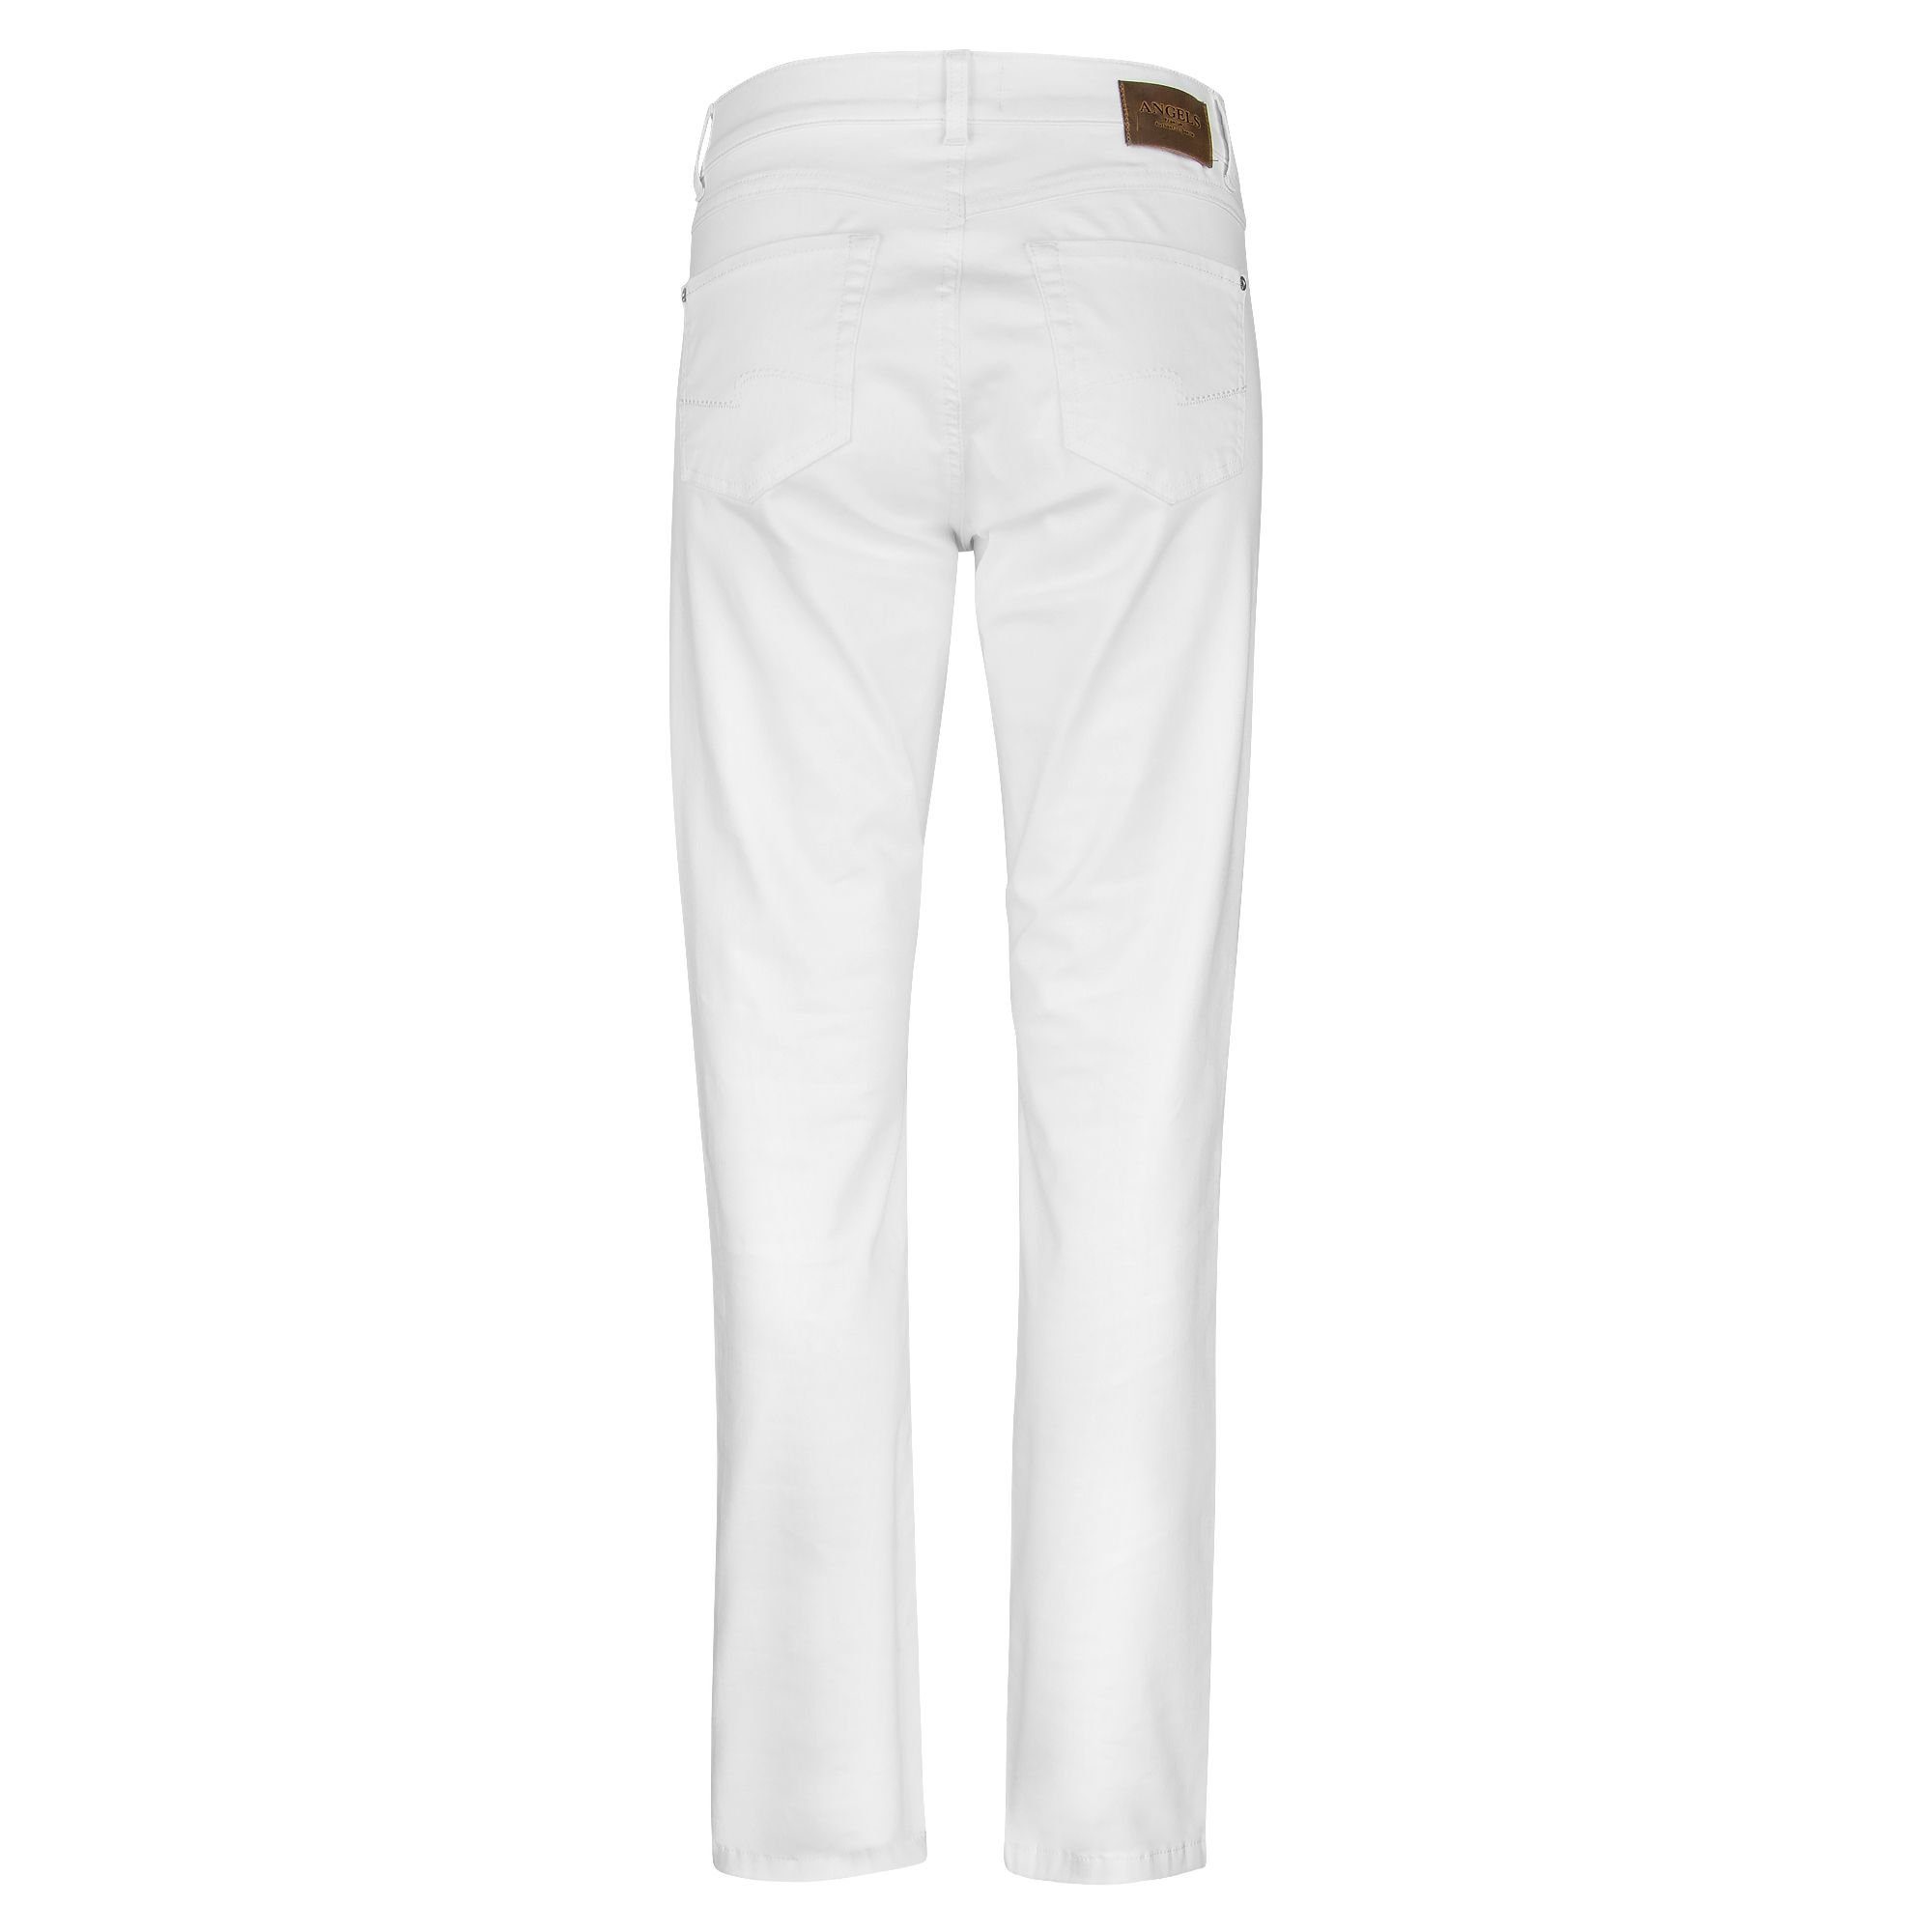 ANGELS Gerade Jeans white